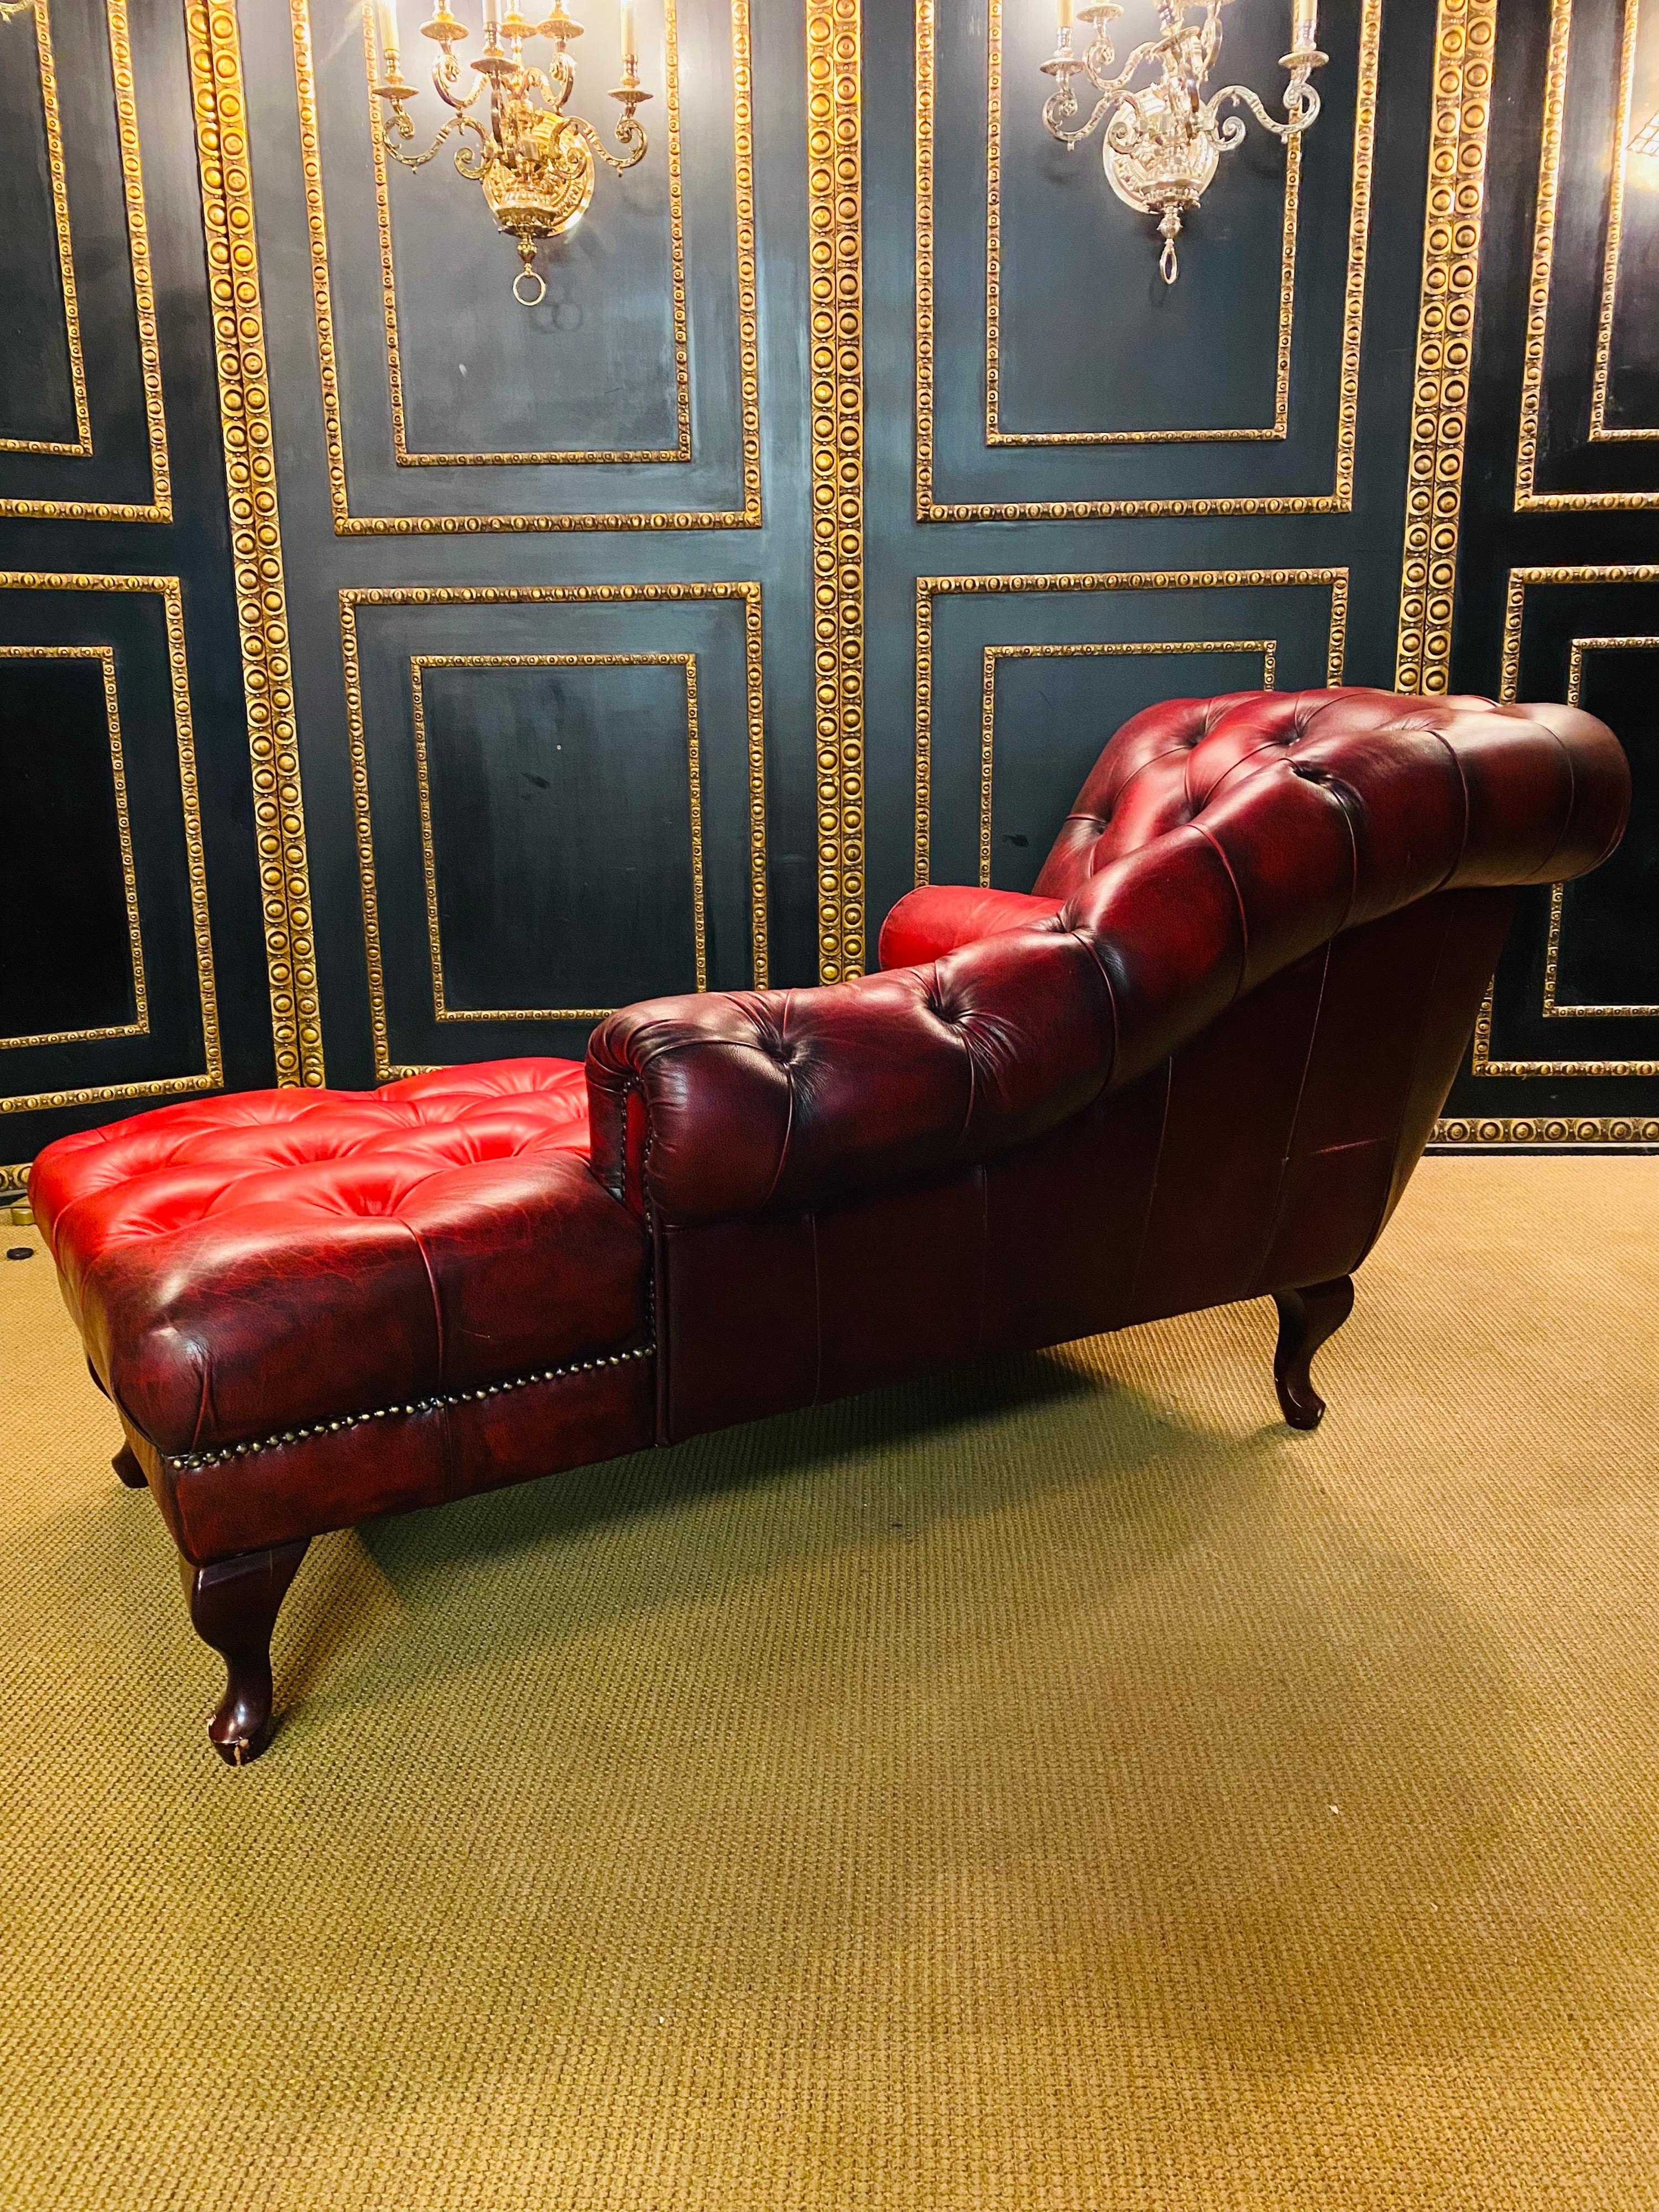 Lovely original vintage Chesterfield Red Leather Chaise Lounge Daybed Sofa For Sale 8